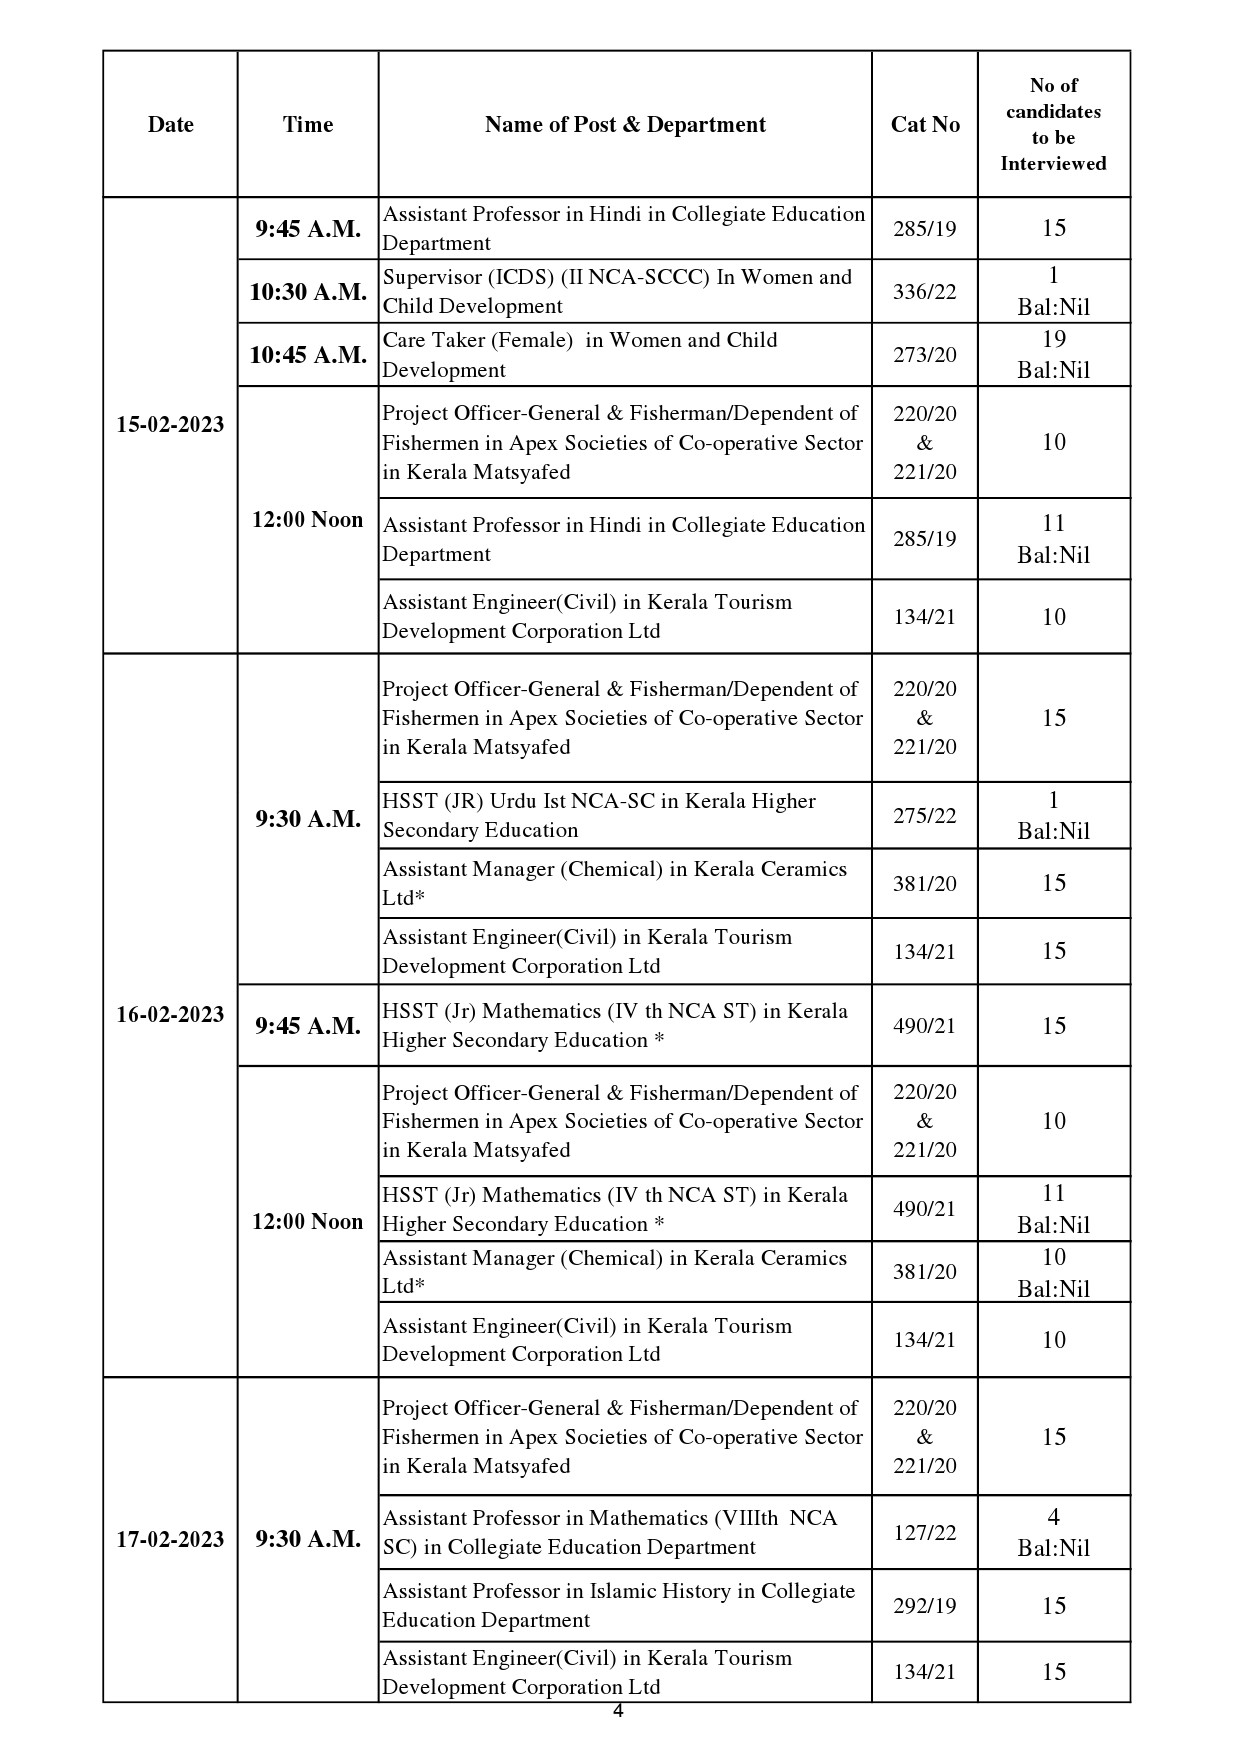 KPSC Revised Interview Programme For February 2023 - Notification Image 4